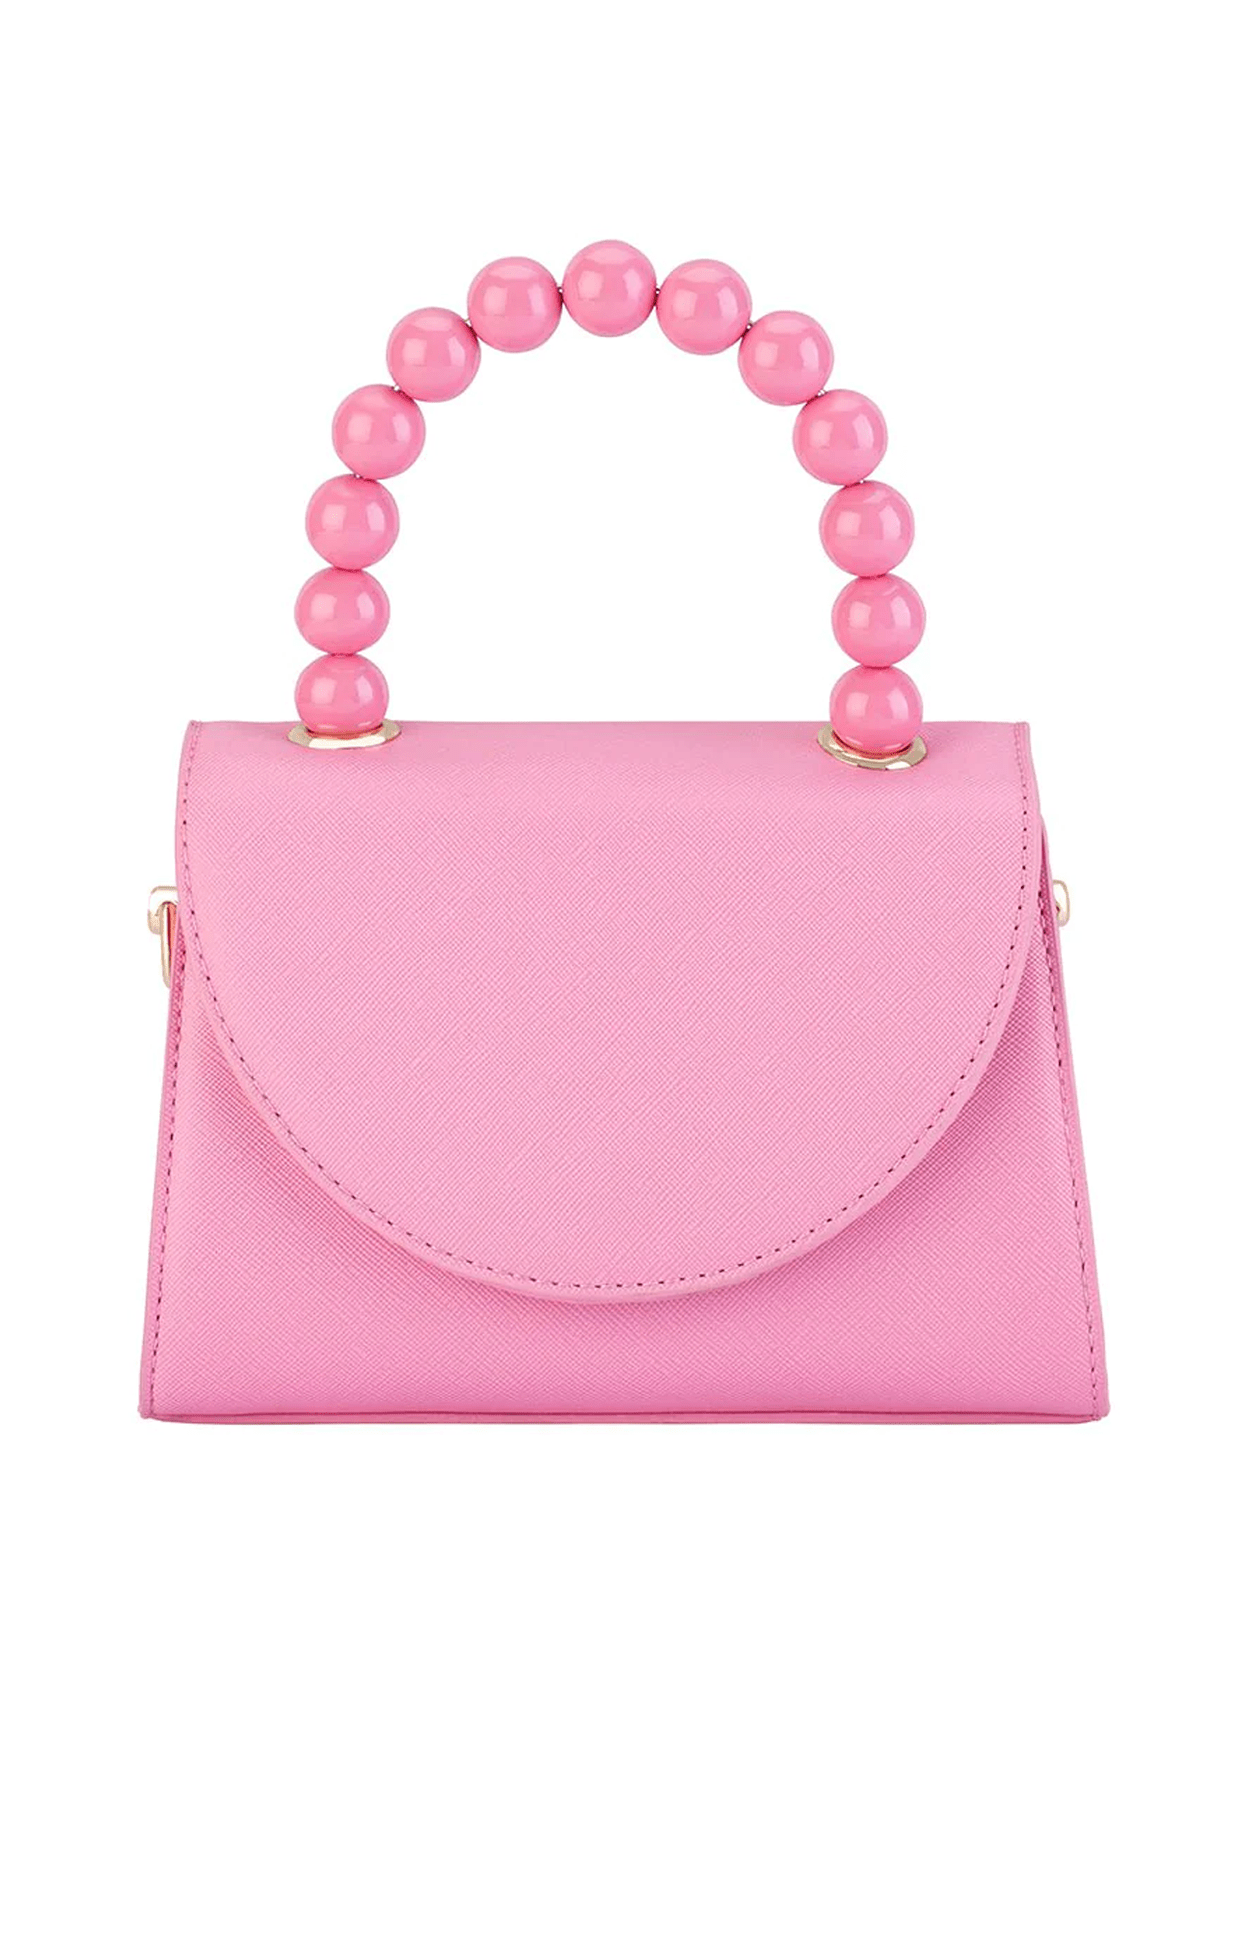 ACCESSORIES Bags Clutches One Size / Pink WENDY BEAD HANDLE BAG IN PINK